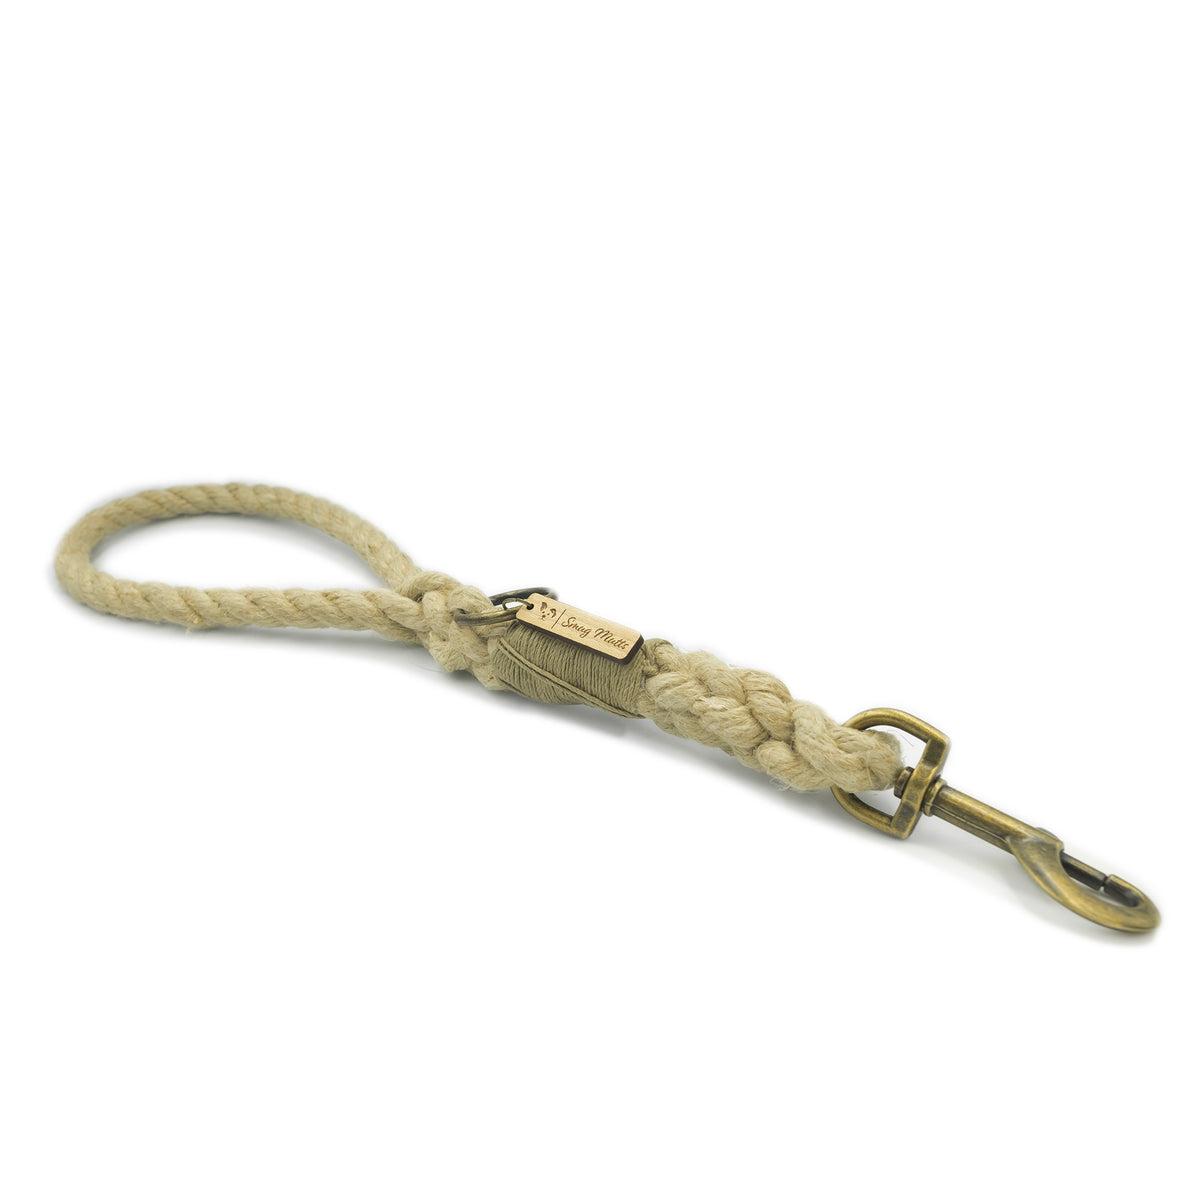 Smug Mutts Handmade, Organic, Natural Hemp Traffic Lead with Olive Green Whipping, Brass O-Ring and a Brass Spring Snap Clip, Natural and Eco Friendly Dog Lead